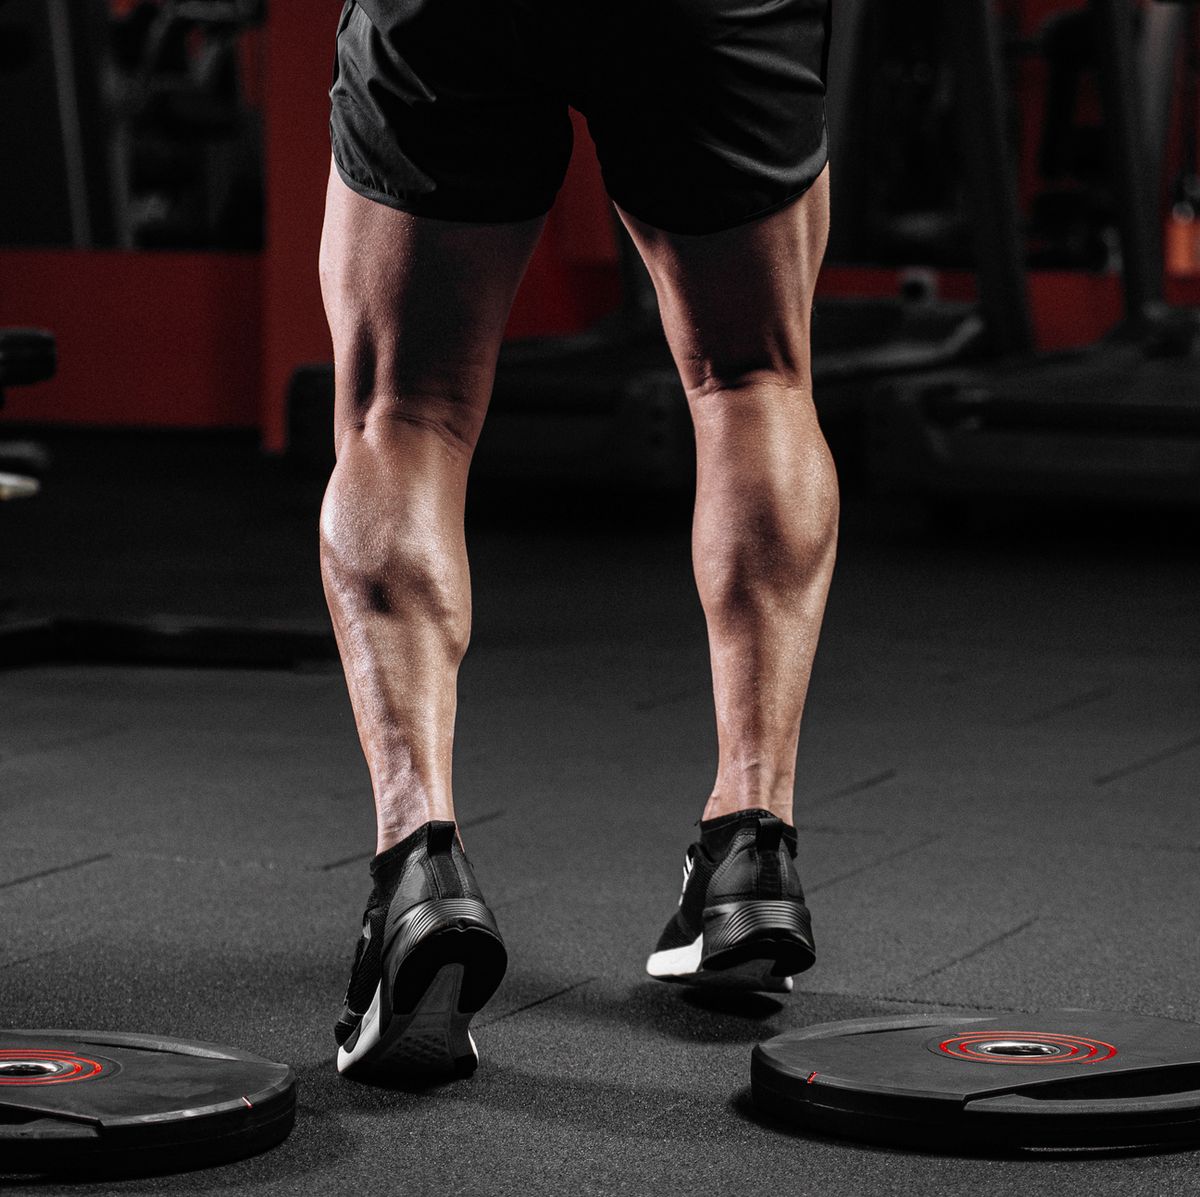 The Best Calf Muscle Workouts and Exercises to Build Strength